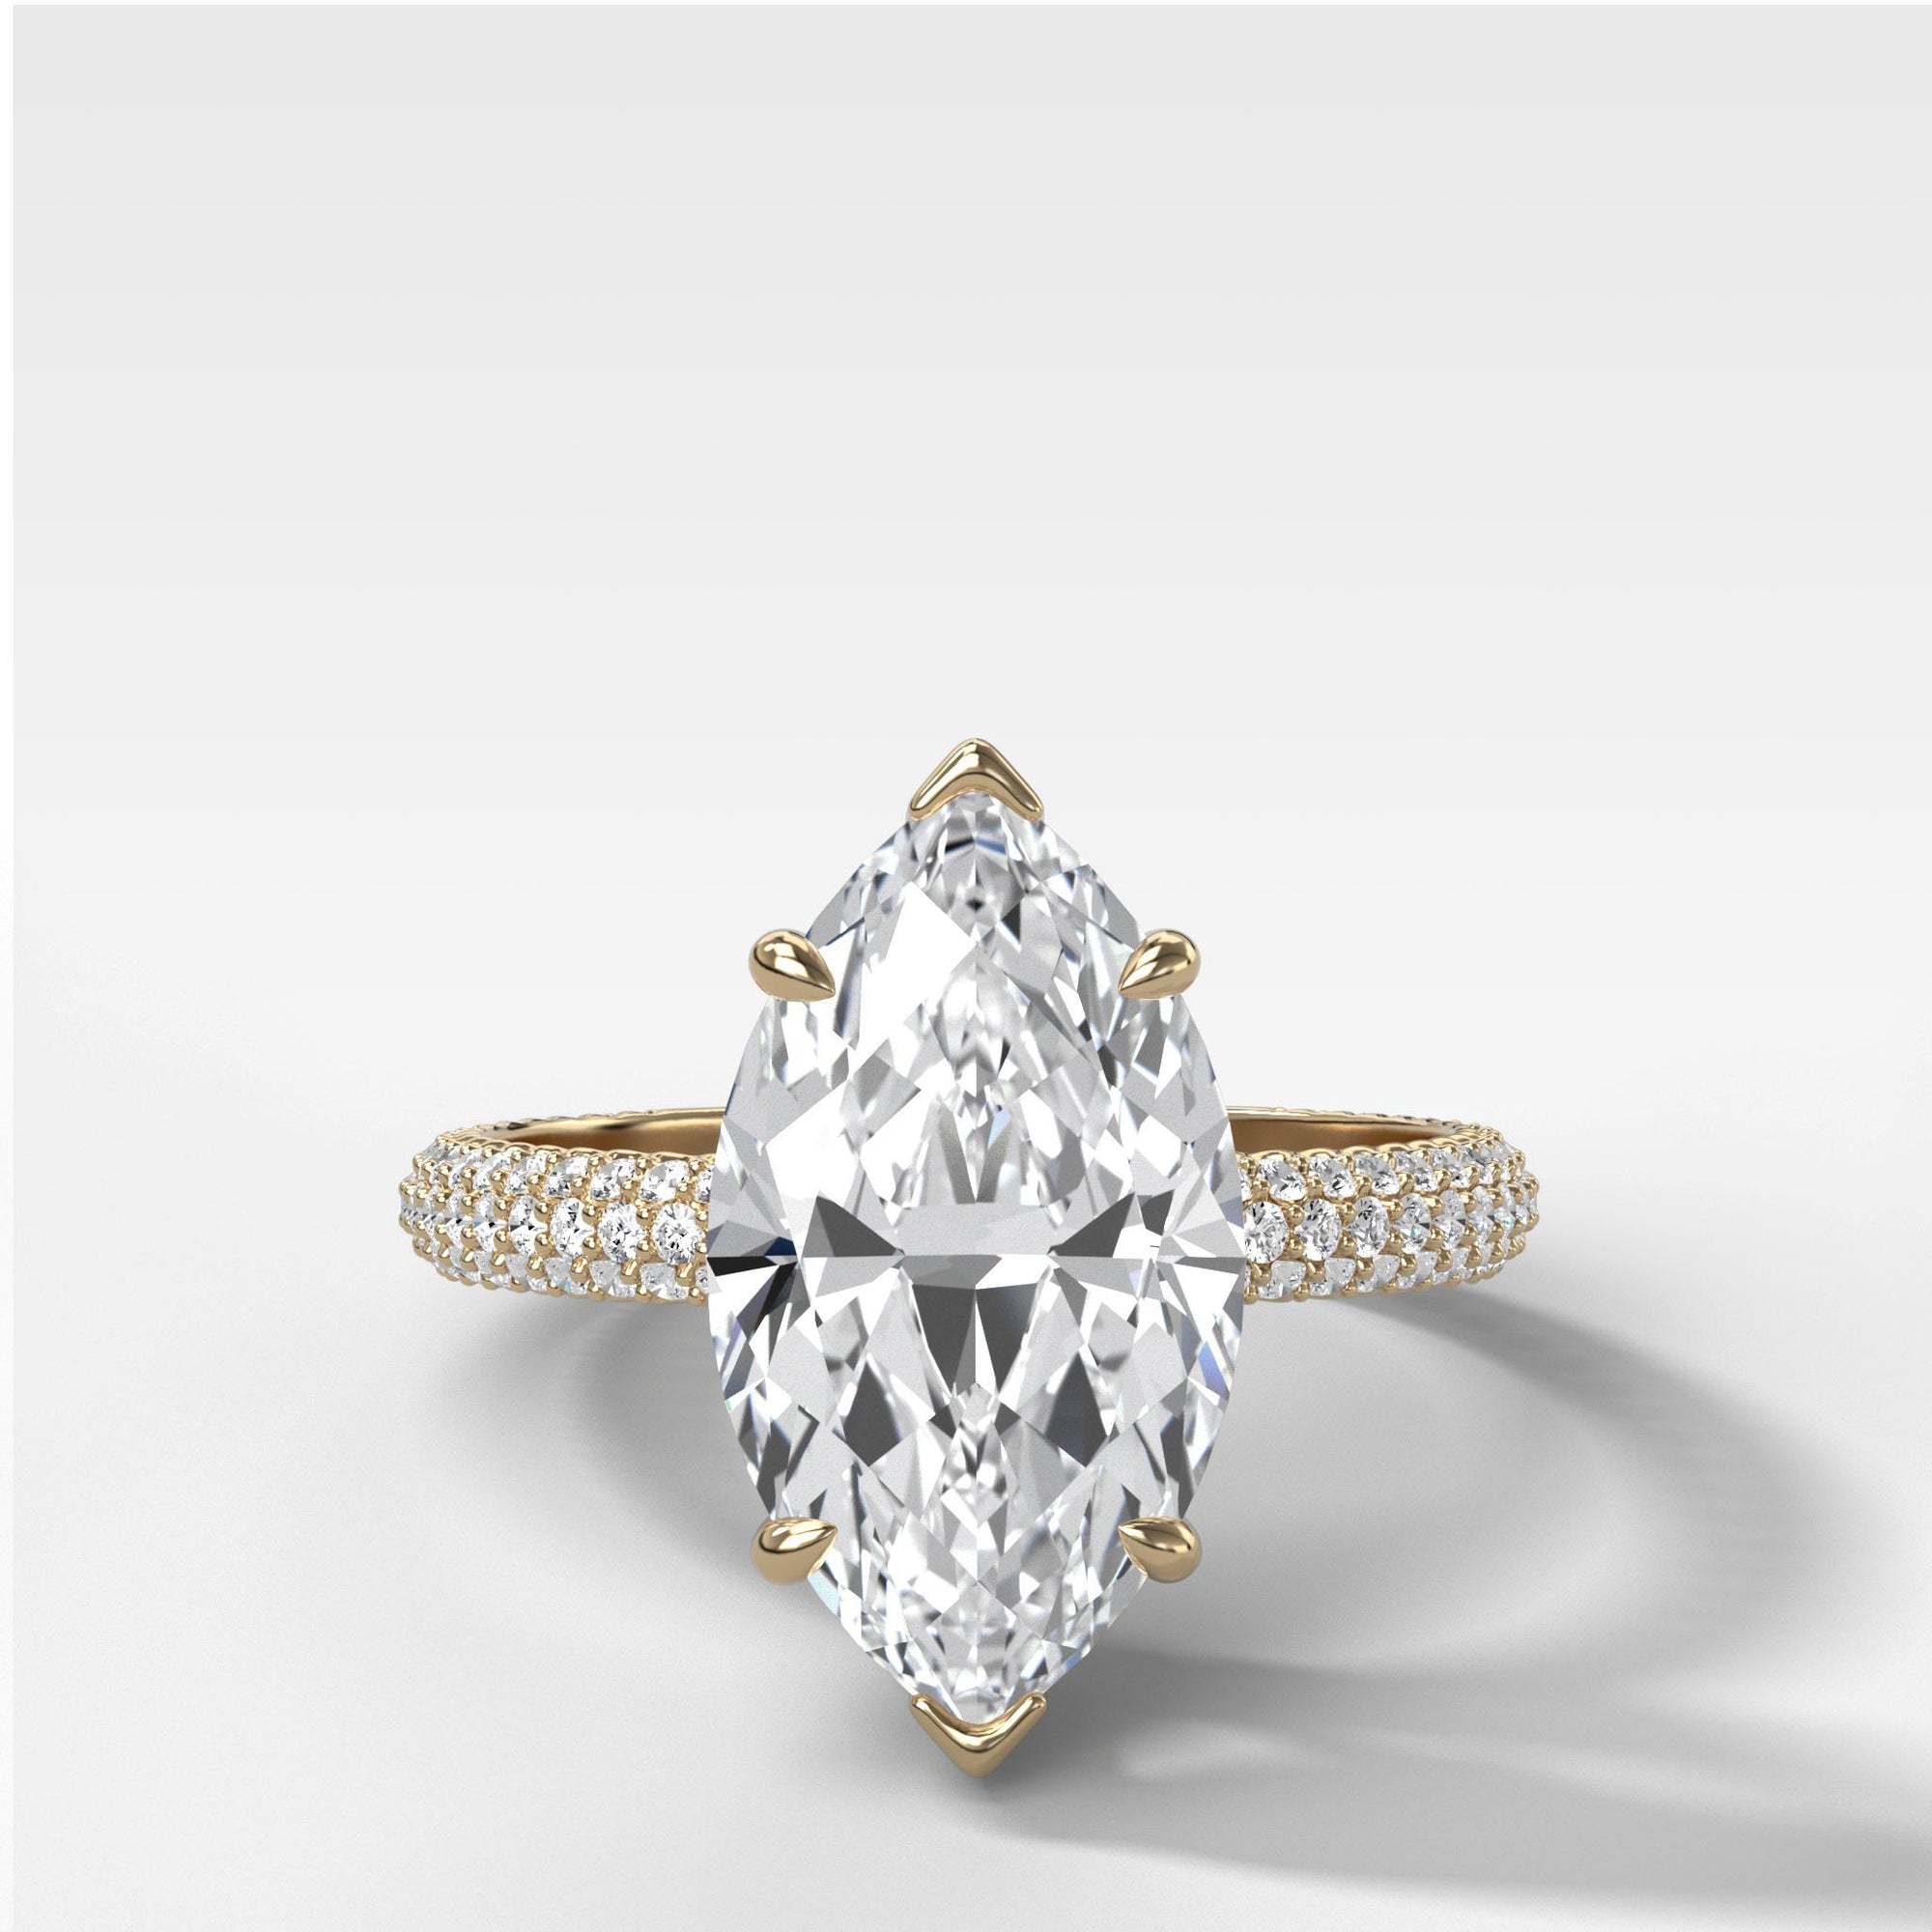 Triple Row Pav≈Ω Engagement Ring With Marquise Cut by Good Stone in Yellow Gold